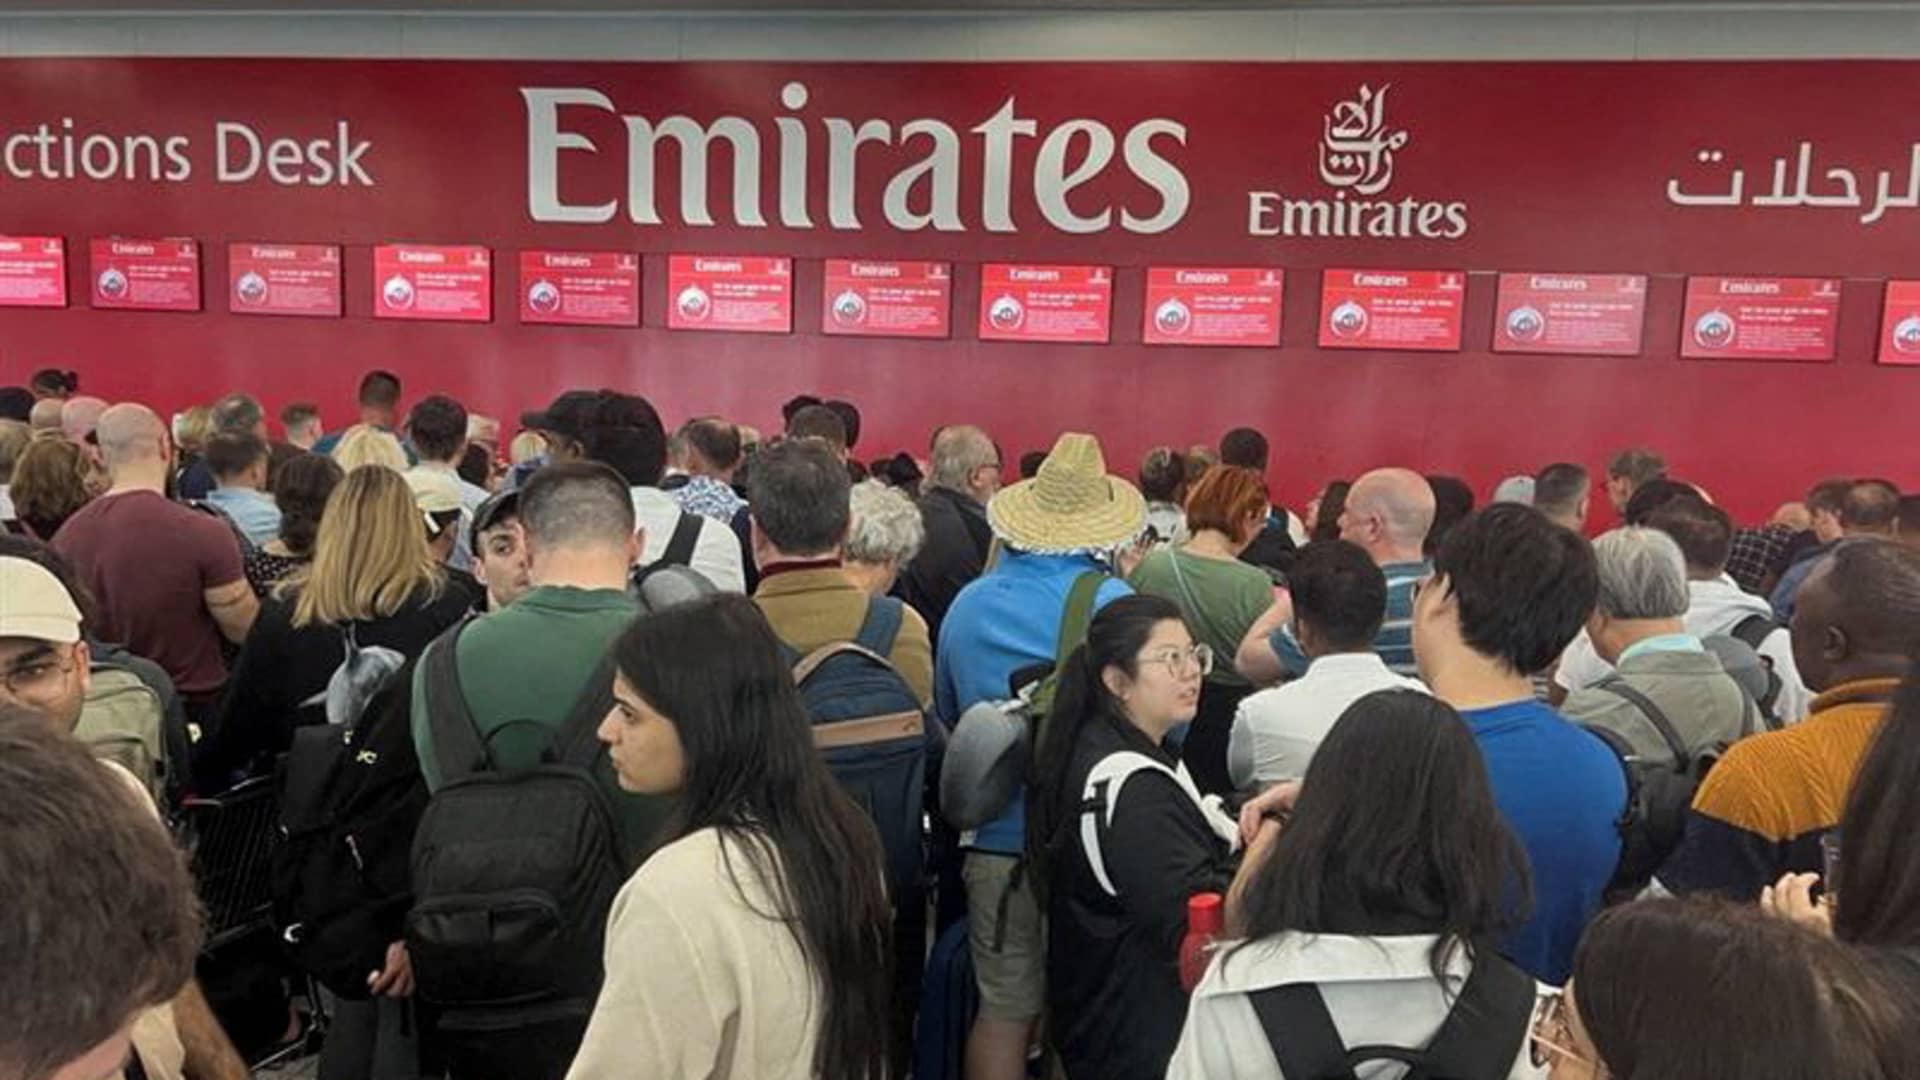 Emirates CEO issues apology after Dubai flood chaos; says airline has 30,000 suitcases to return